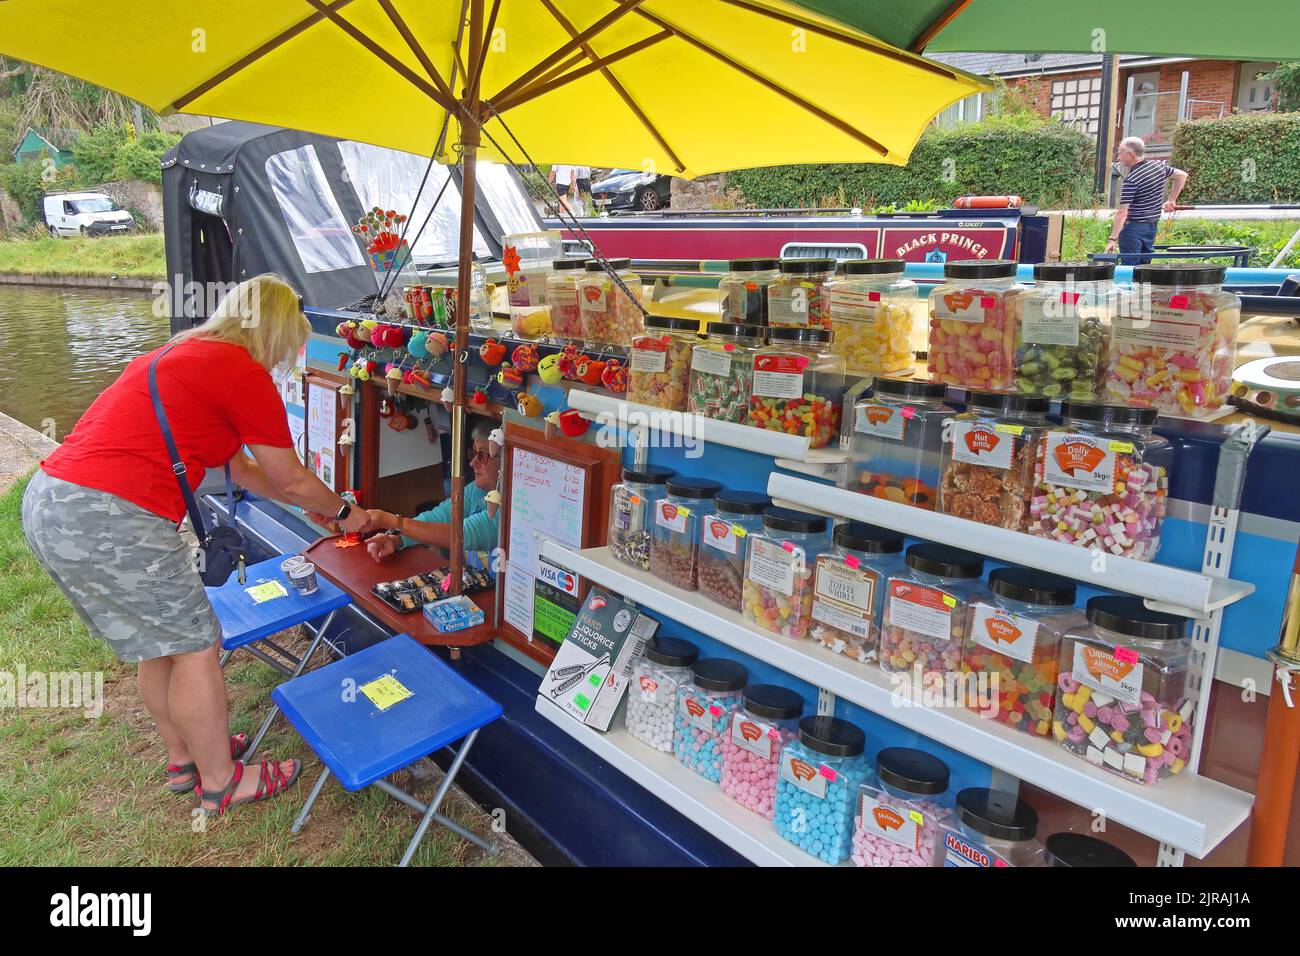 Buying sweets from a barge, Vale of Llangollen, Trevor, Llangollen, Wales, UK,  LL20 7TP Stock Photo